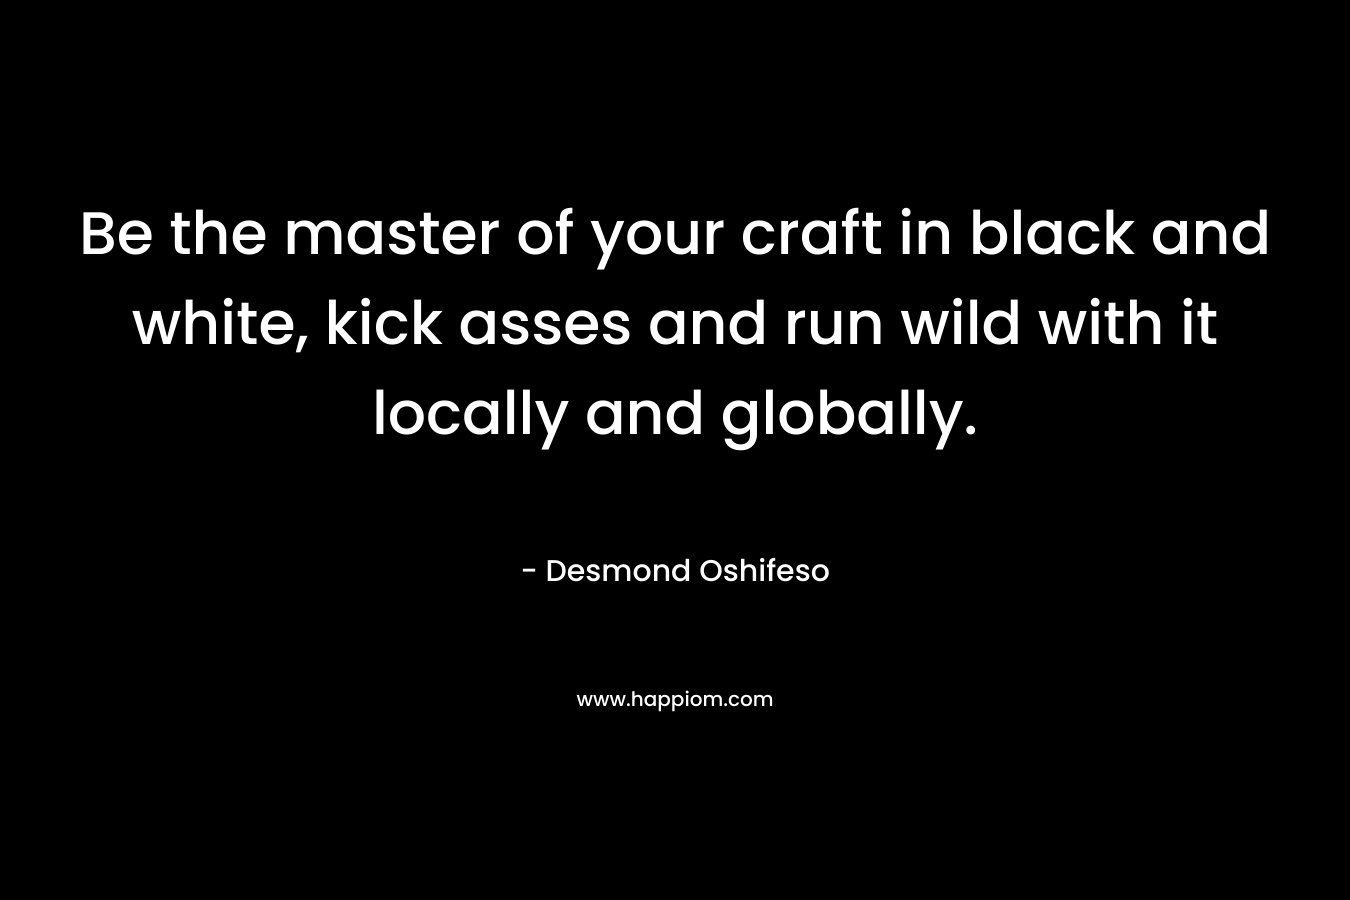 Be the master of your craft in black and white, kick asses and run wild with it locally and globally. – Desmond Oshifeso